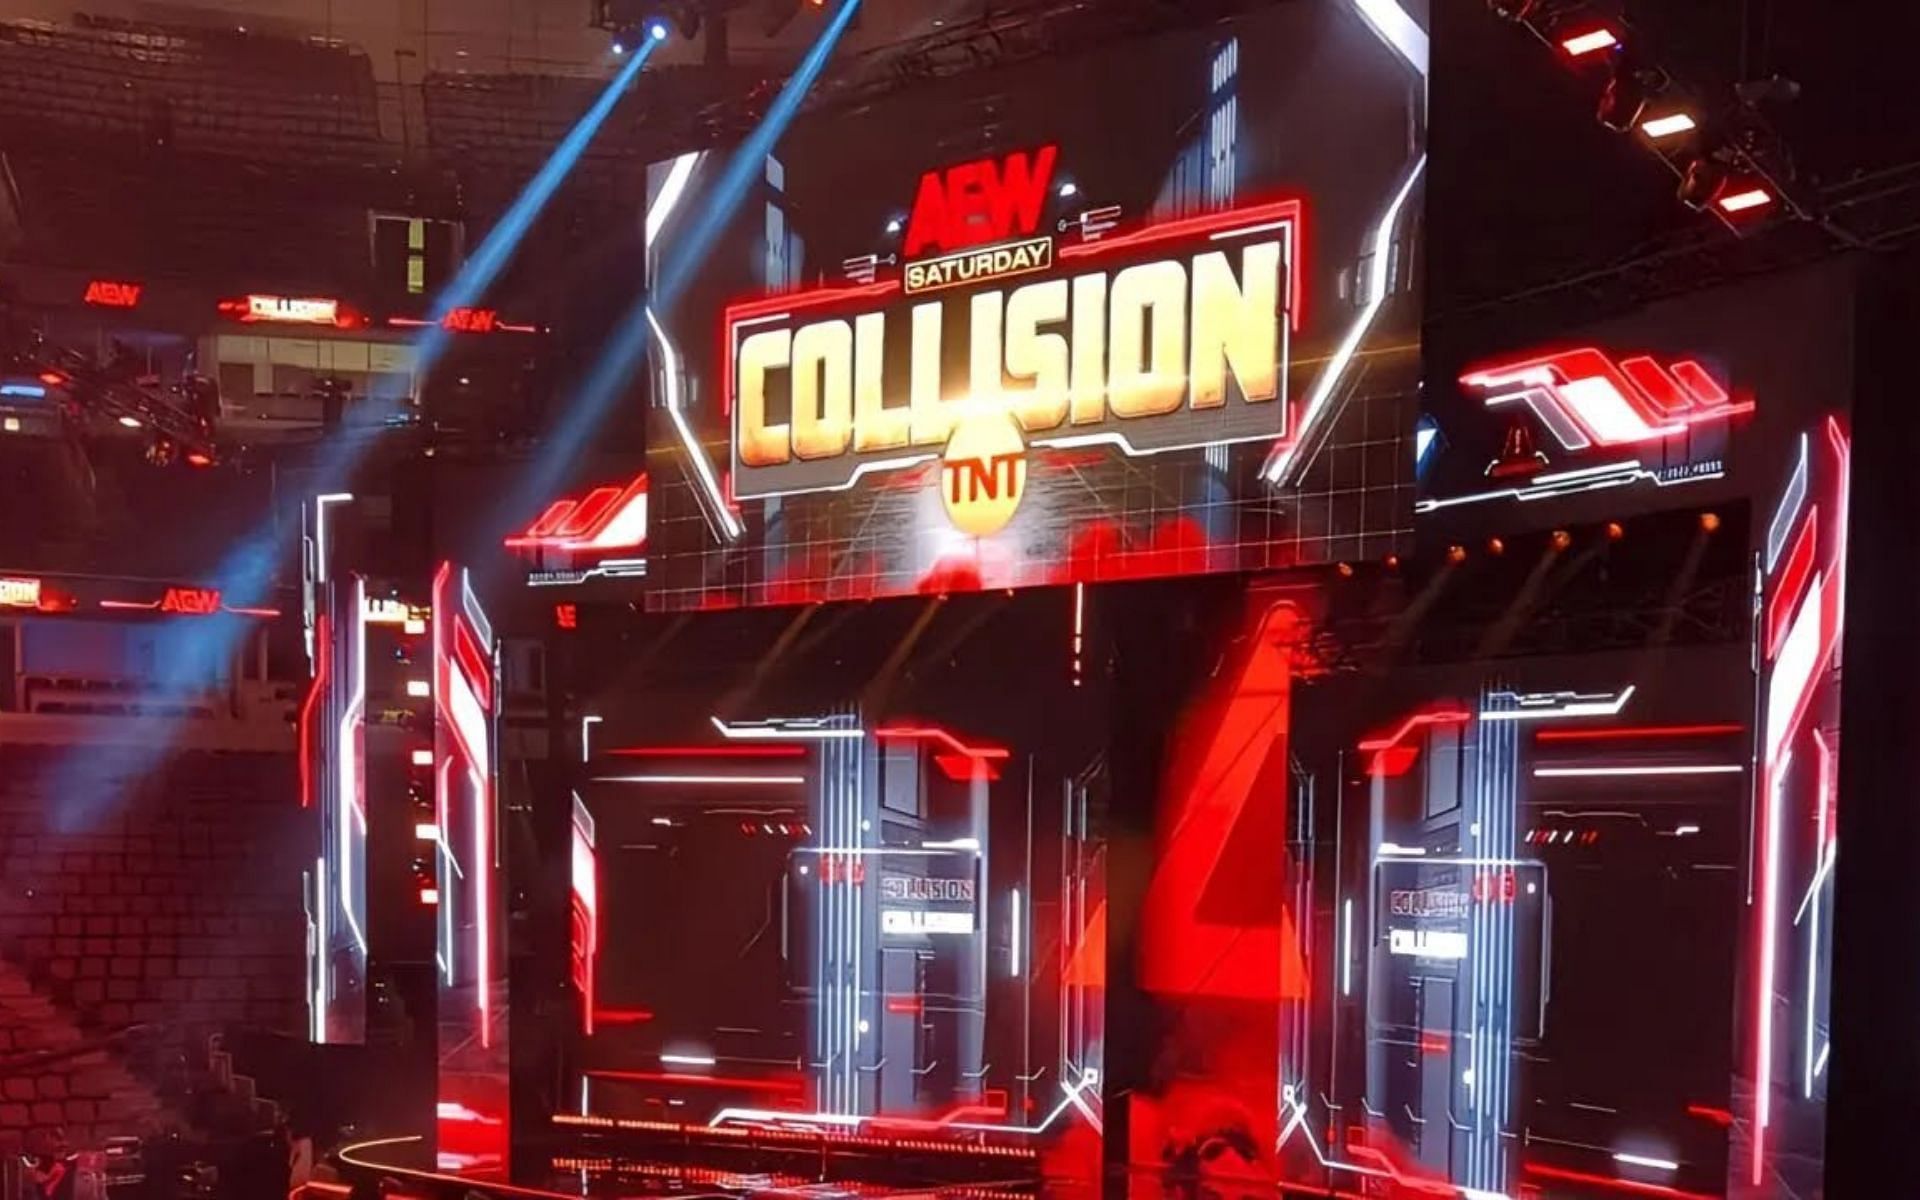 Statistics for the third episode of AEW Collision revealed! 